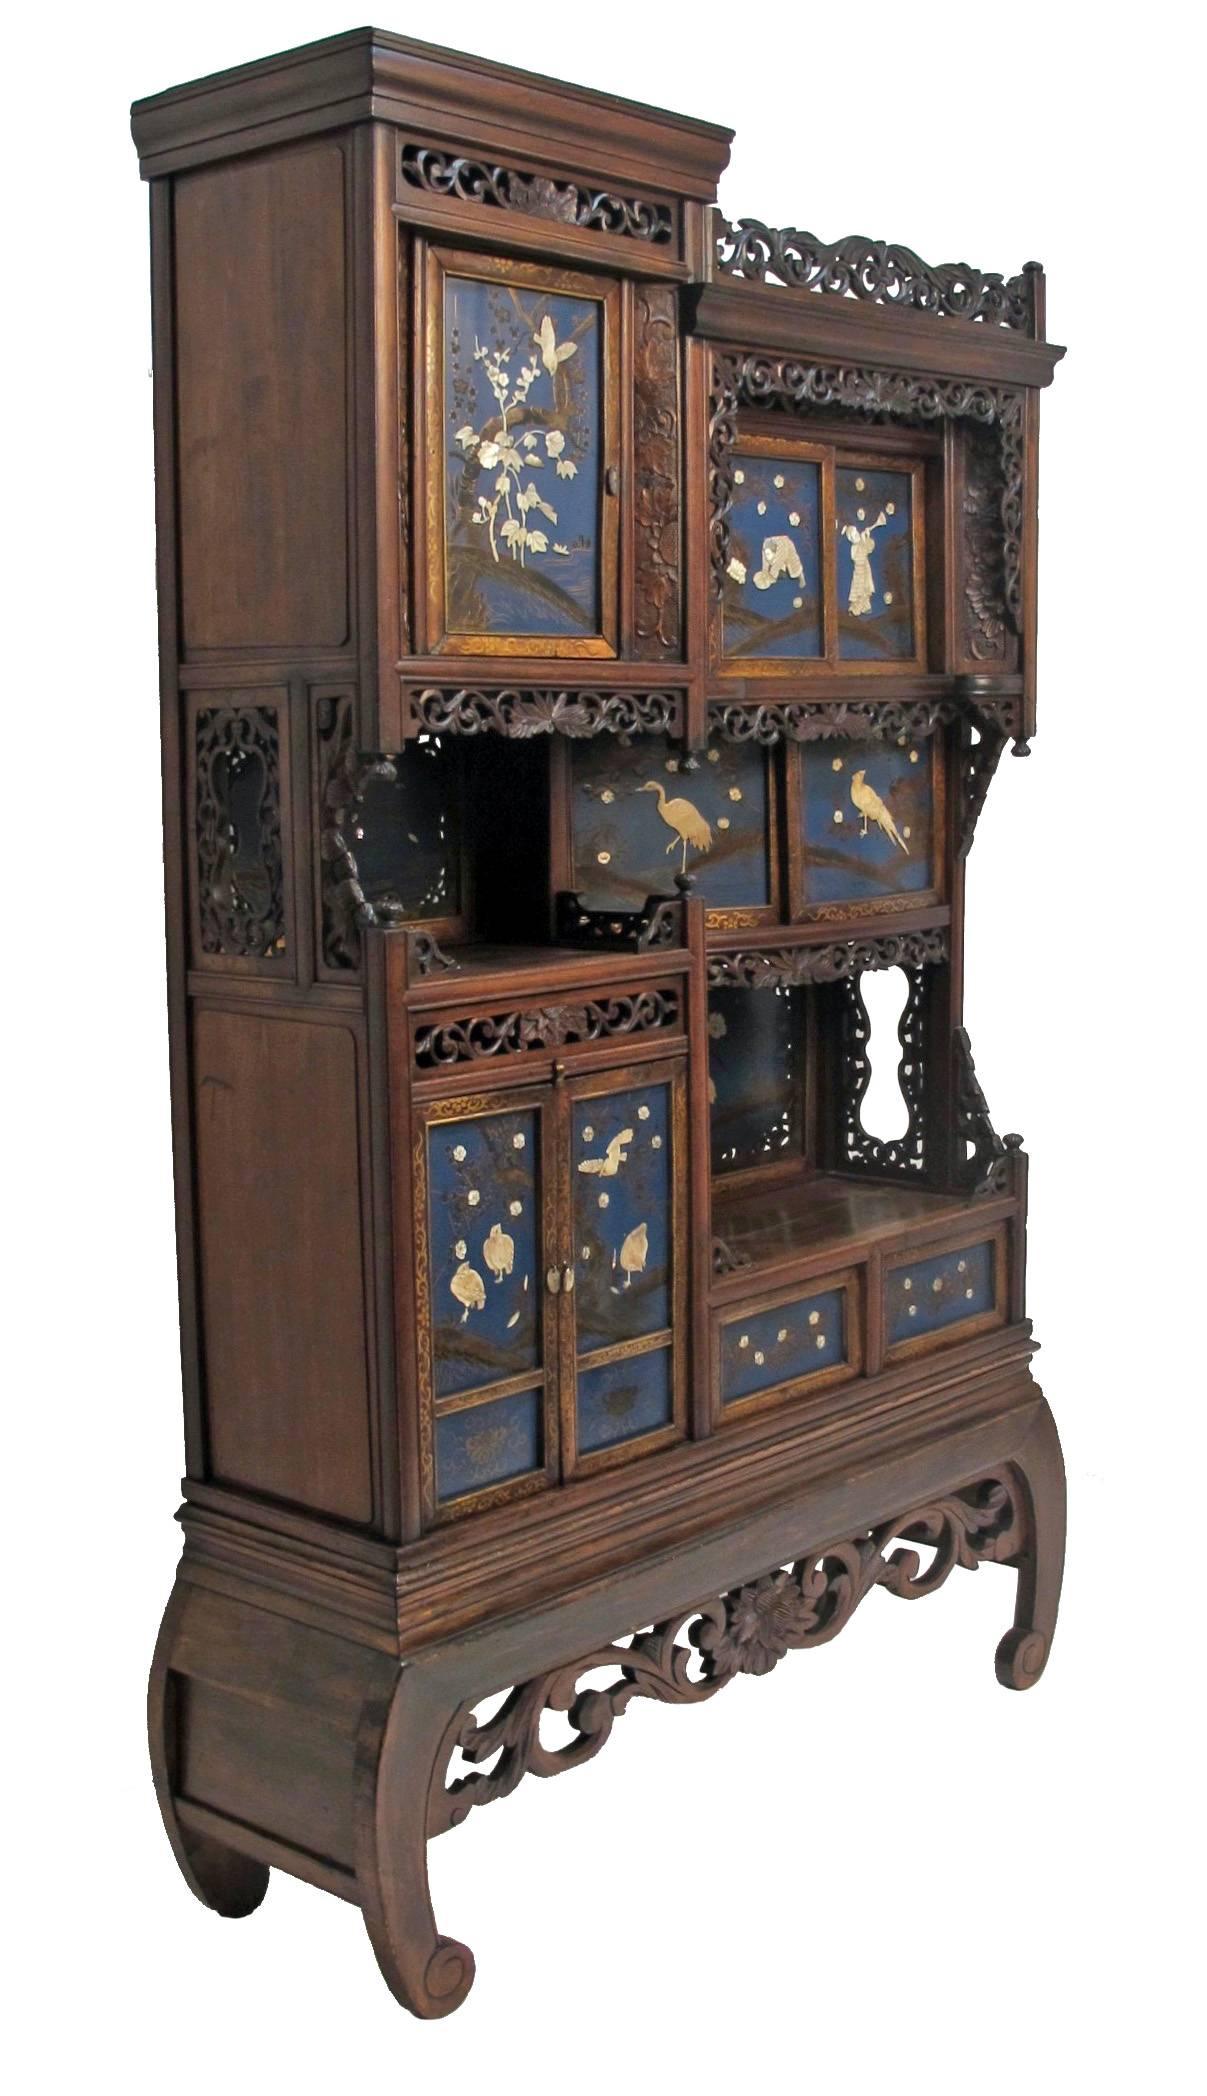 Beautifully carved wood cabinet or Etagere with bone and mother-of-pearl relief decoration on blue lacquer background. In remarkably good original condition, Japan, late 19th century.